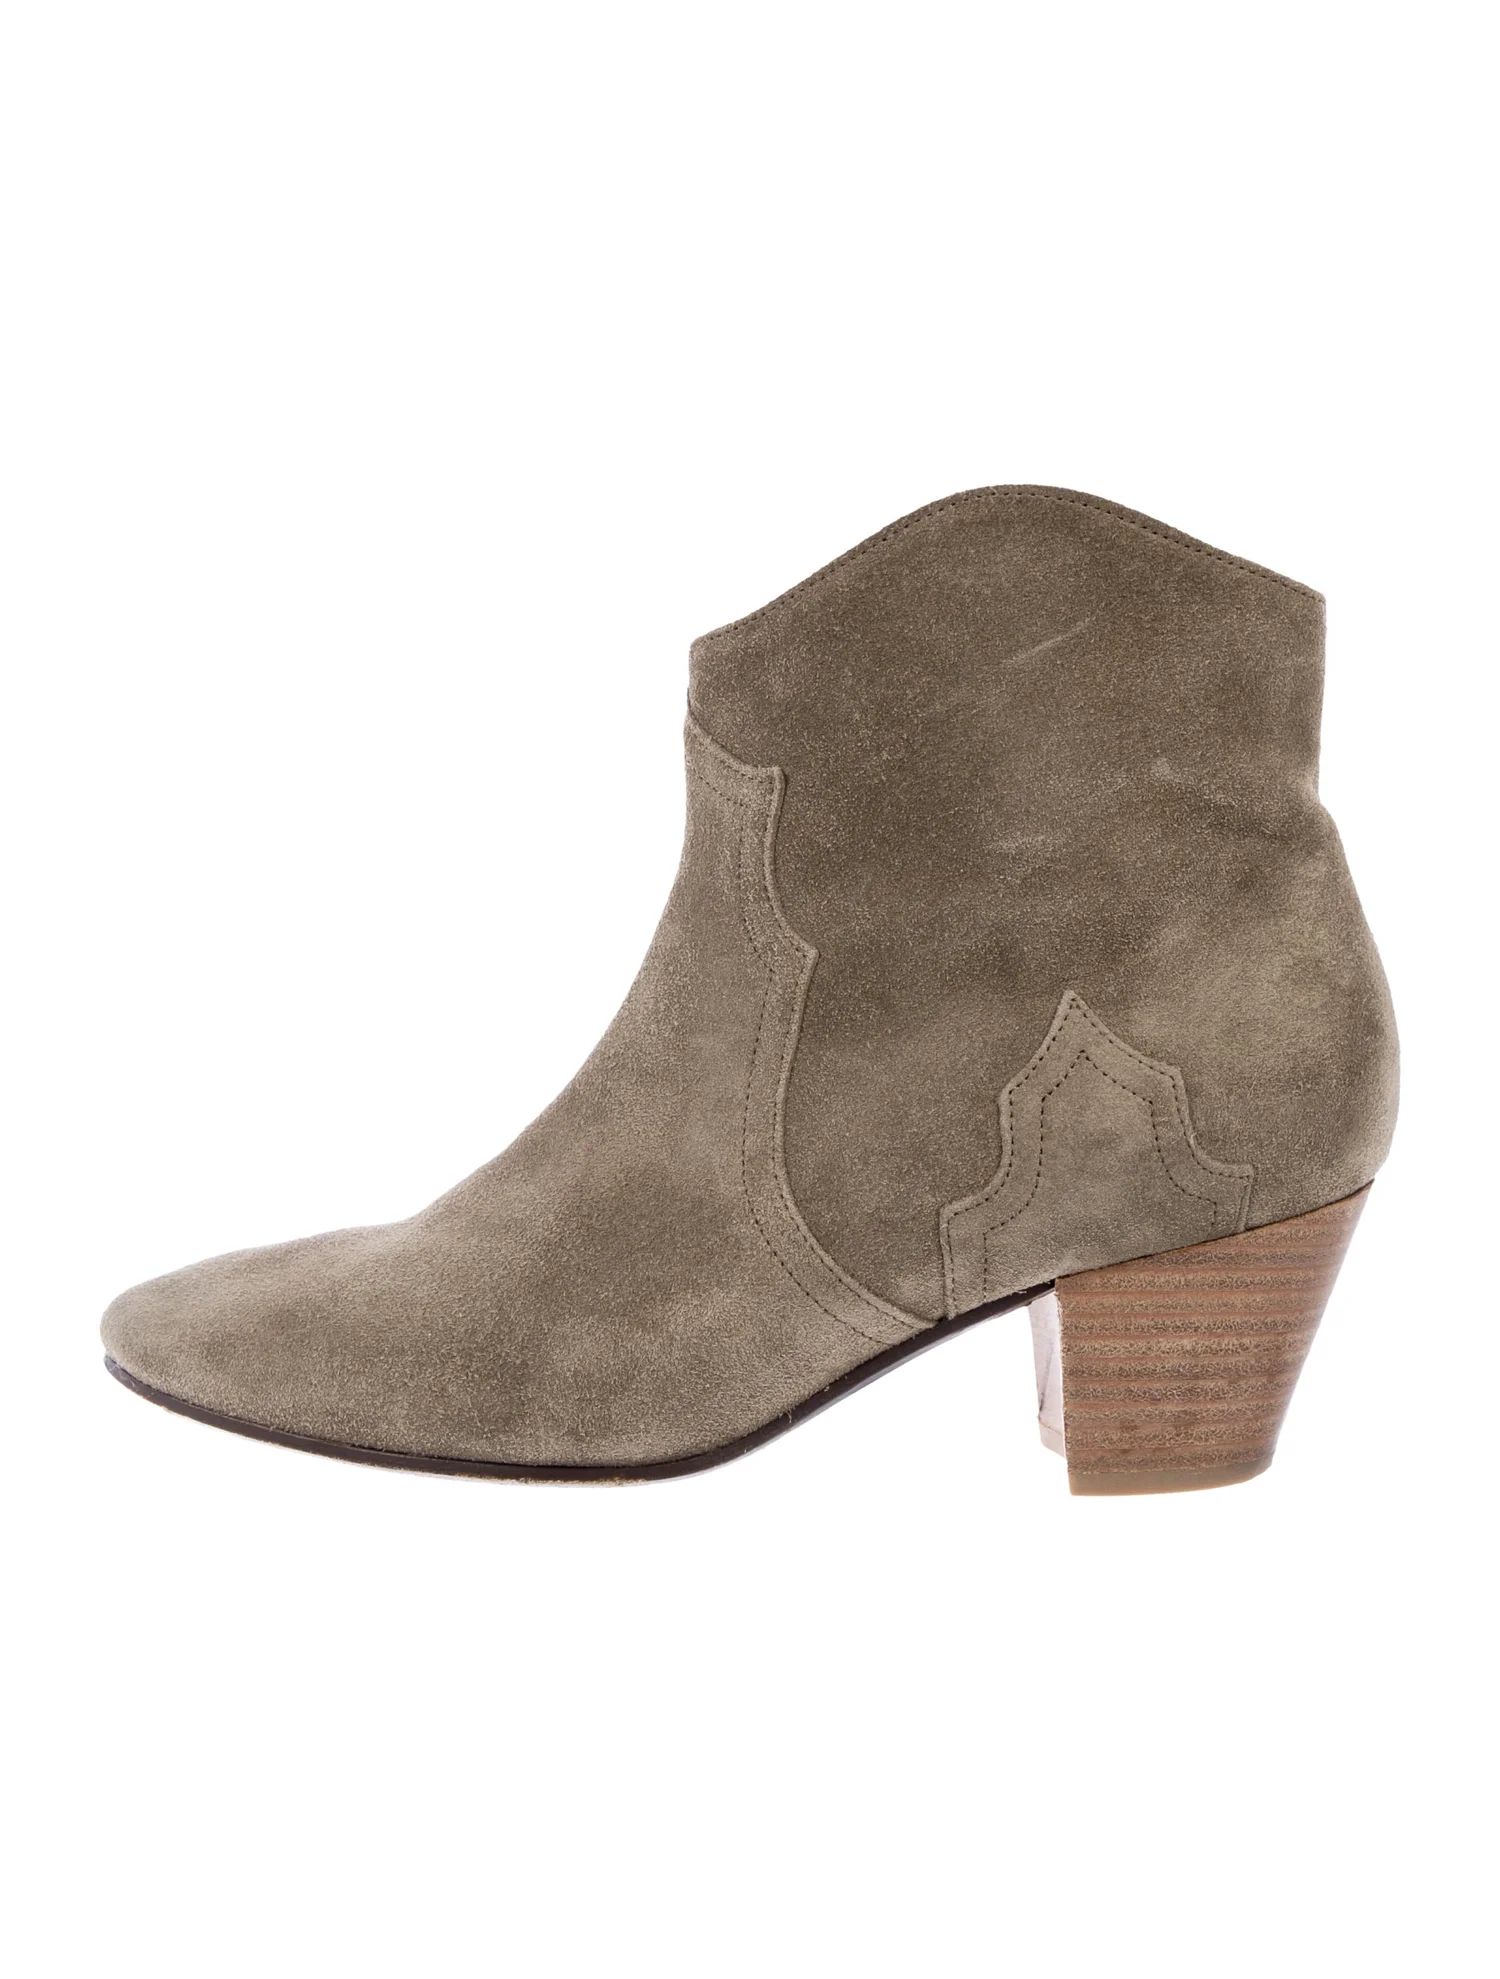 Étoile Isabel Marant Dicker Suede Ankle Boots - Shoes -
          WET75335 | The RealReal | The RealReal